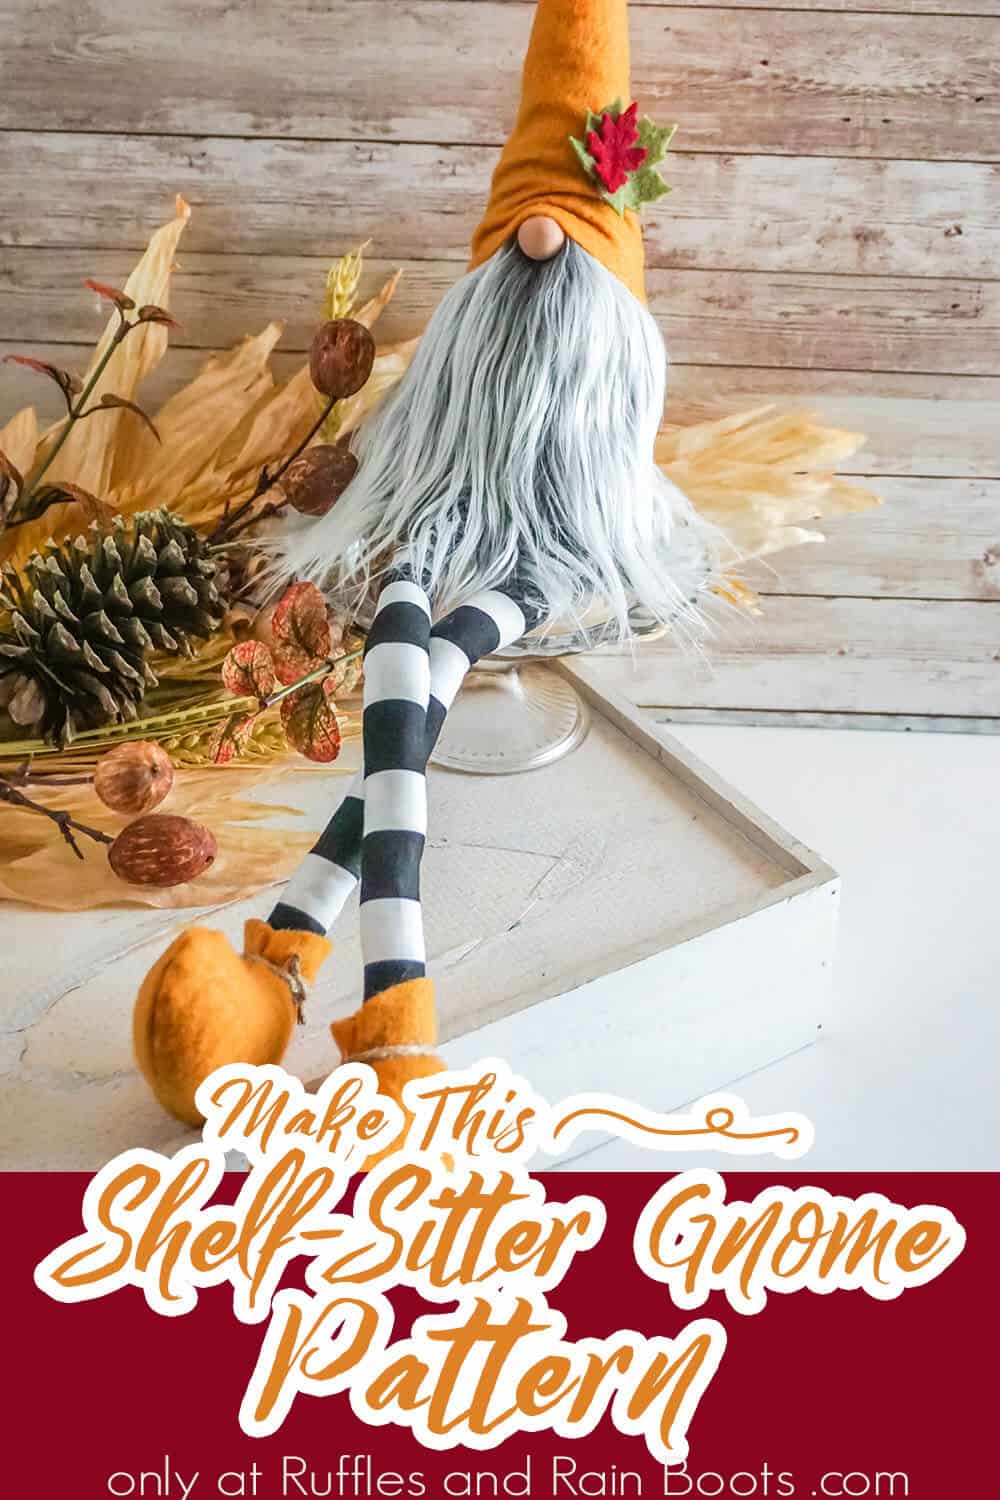 Gnome pattern for fall with text which reads make this shelf sitter gnome pattern.